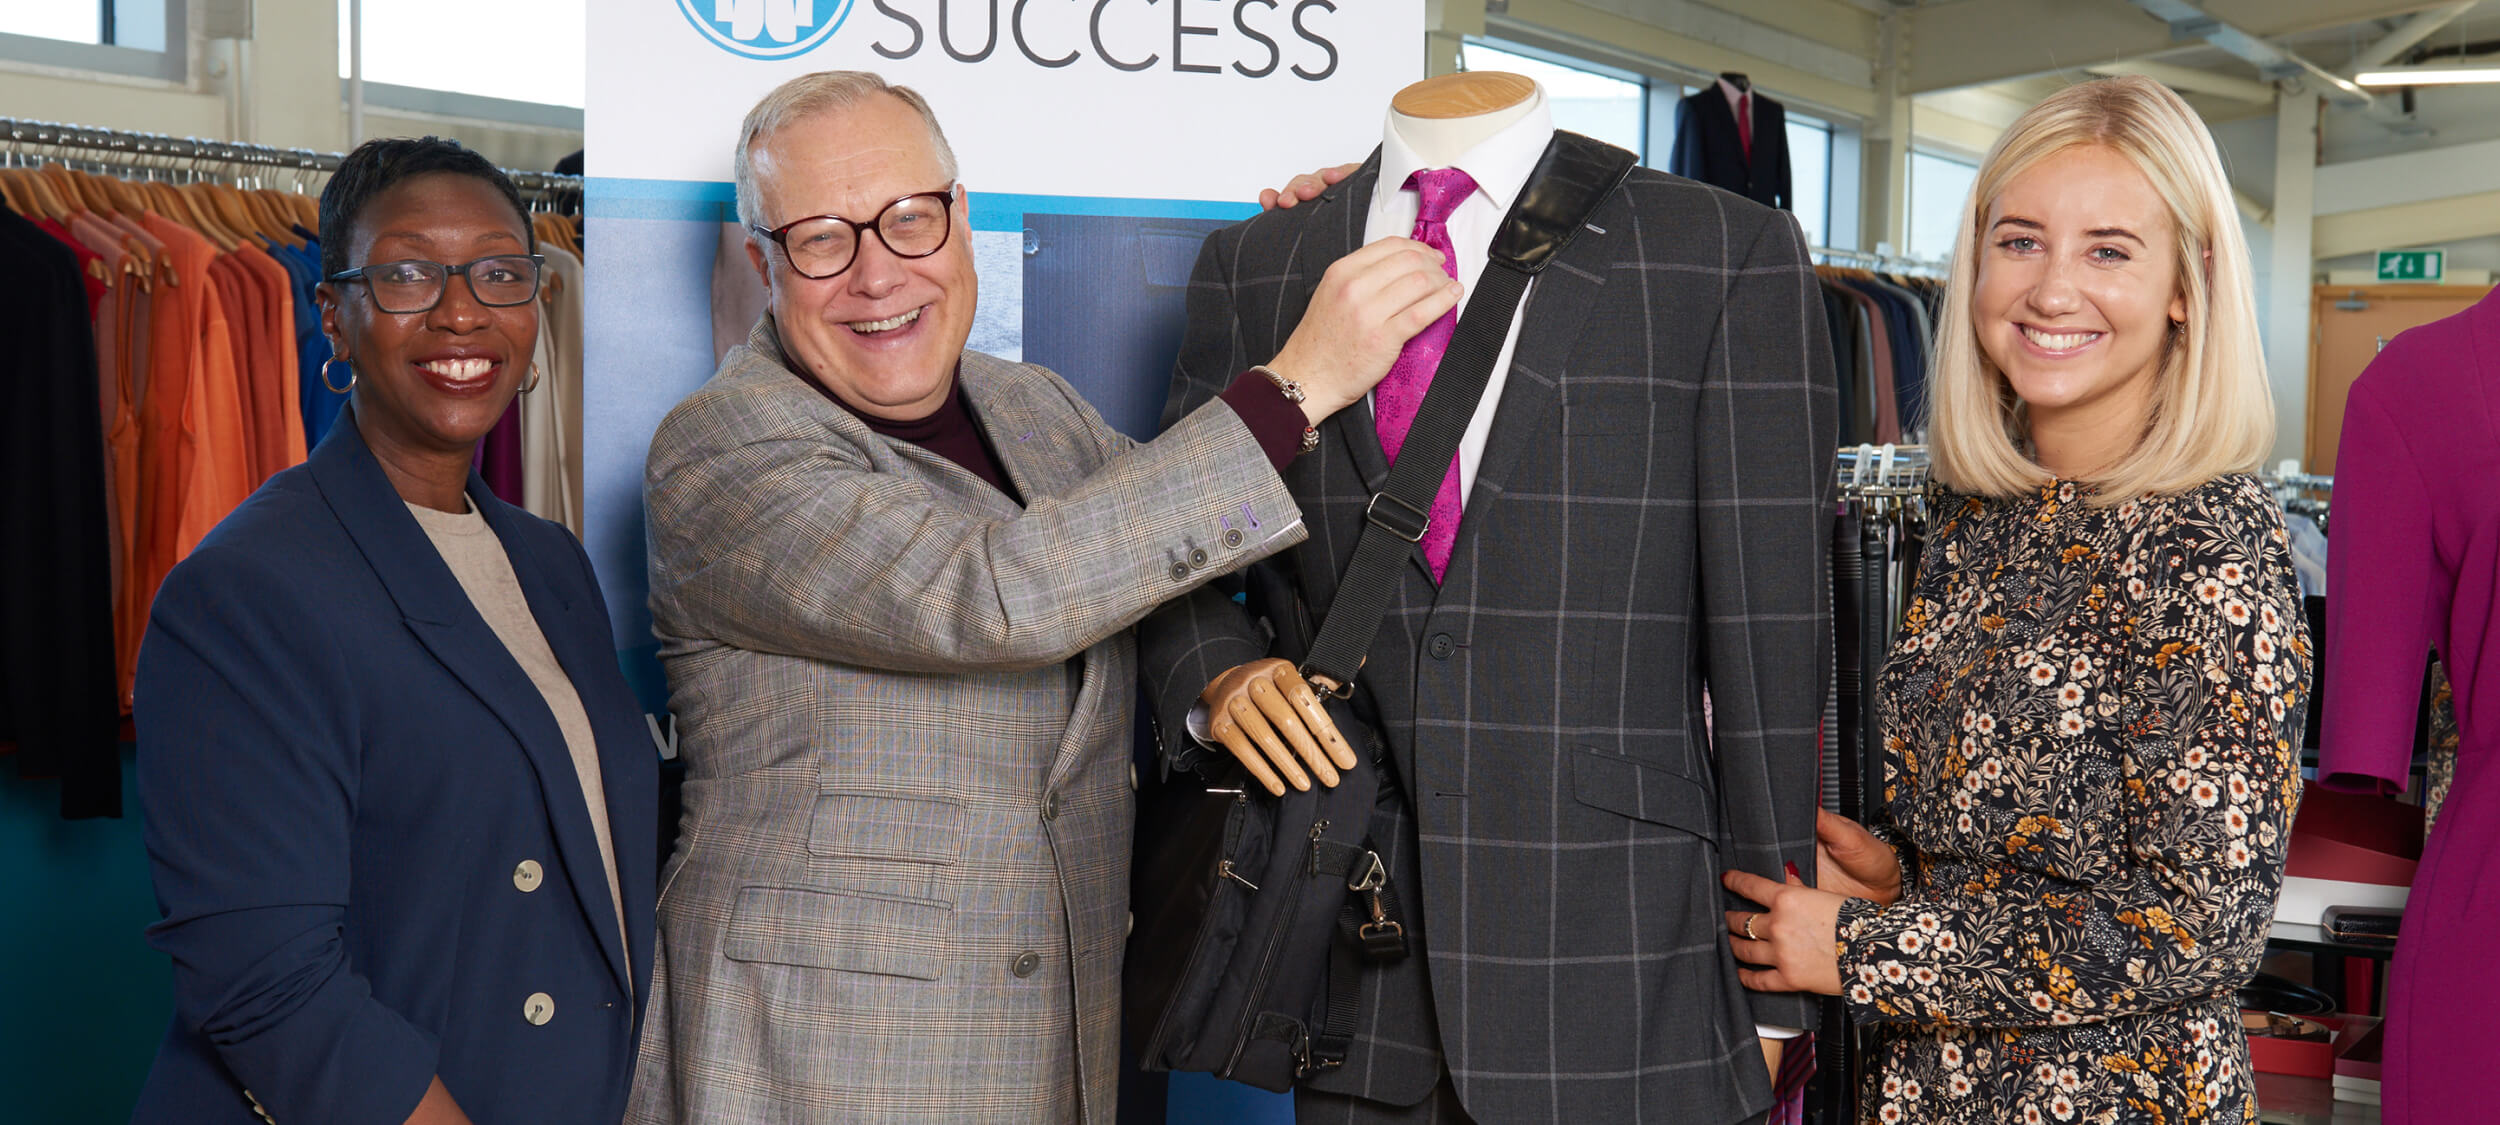 Suited for Success Banner.